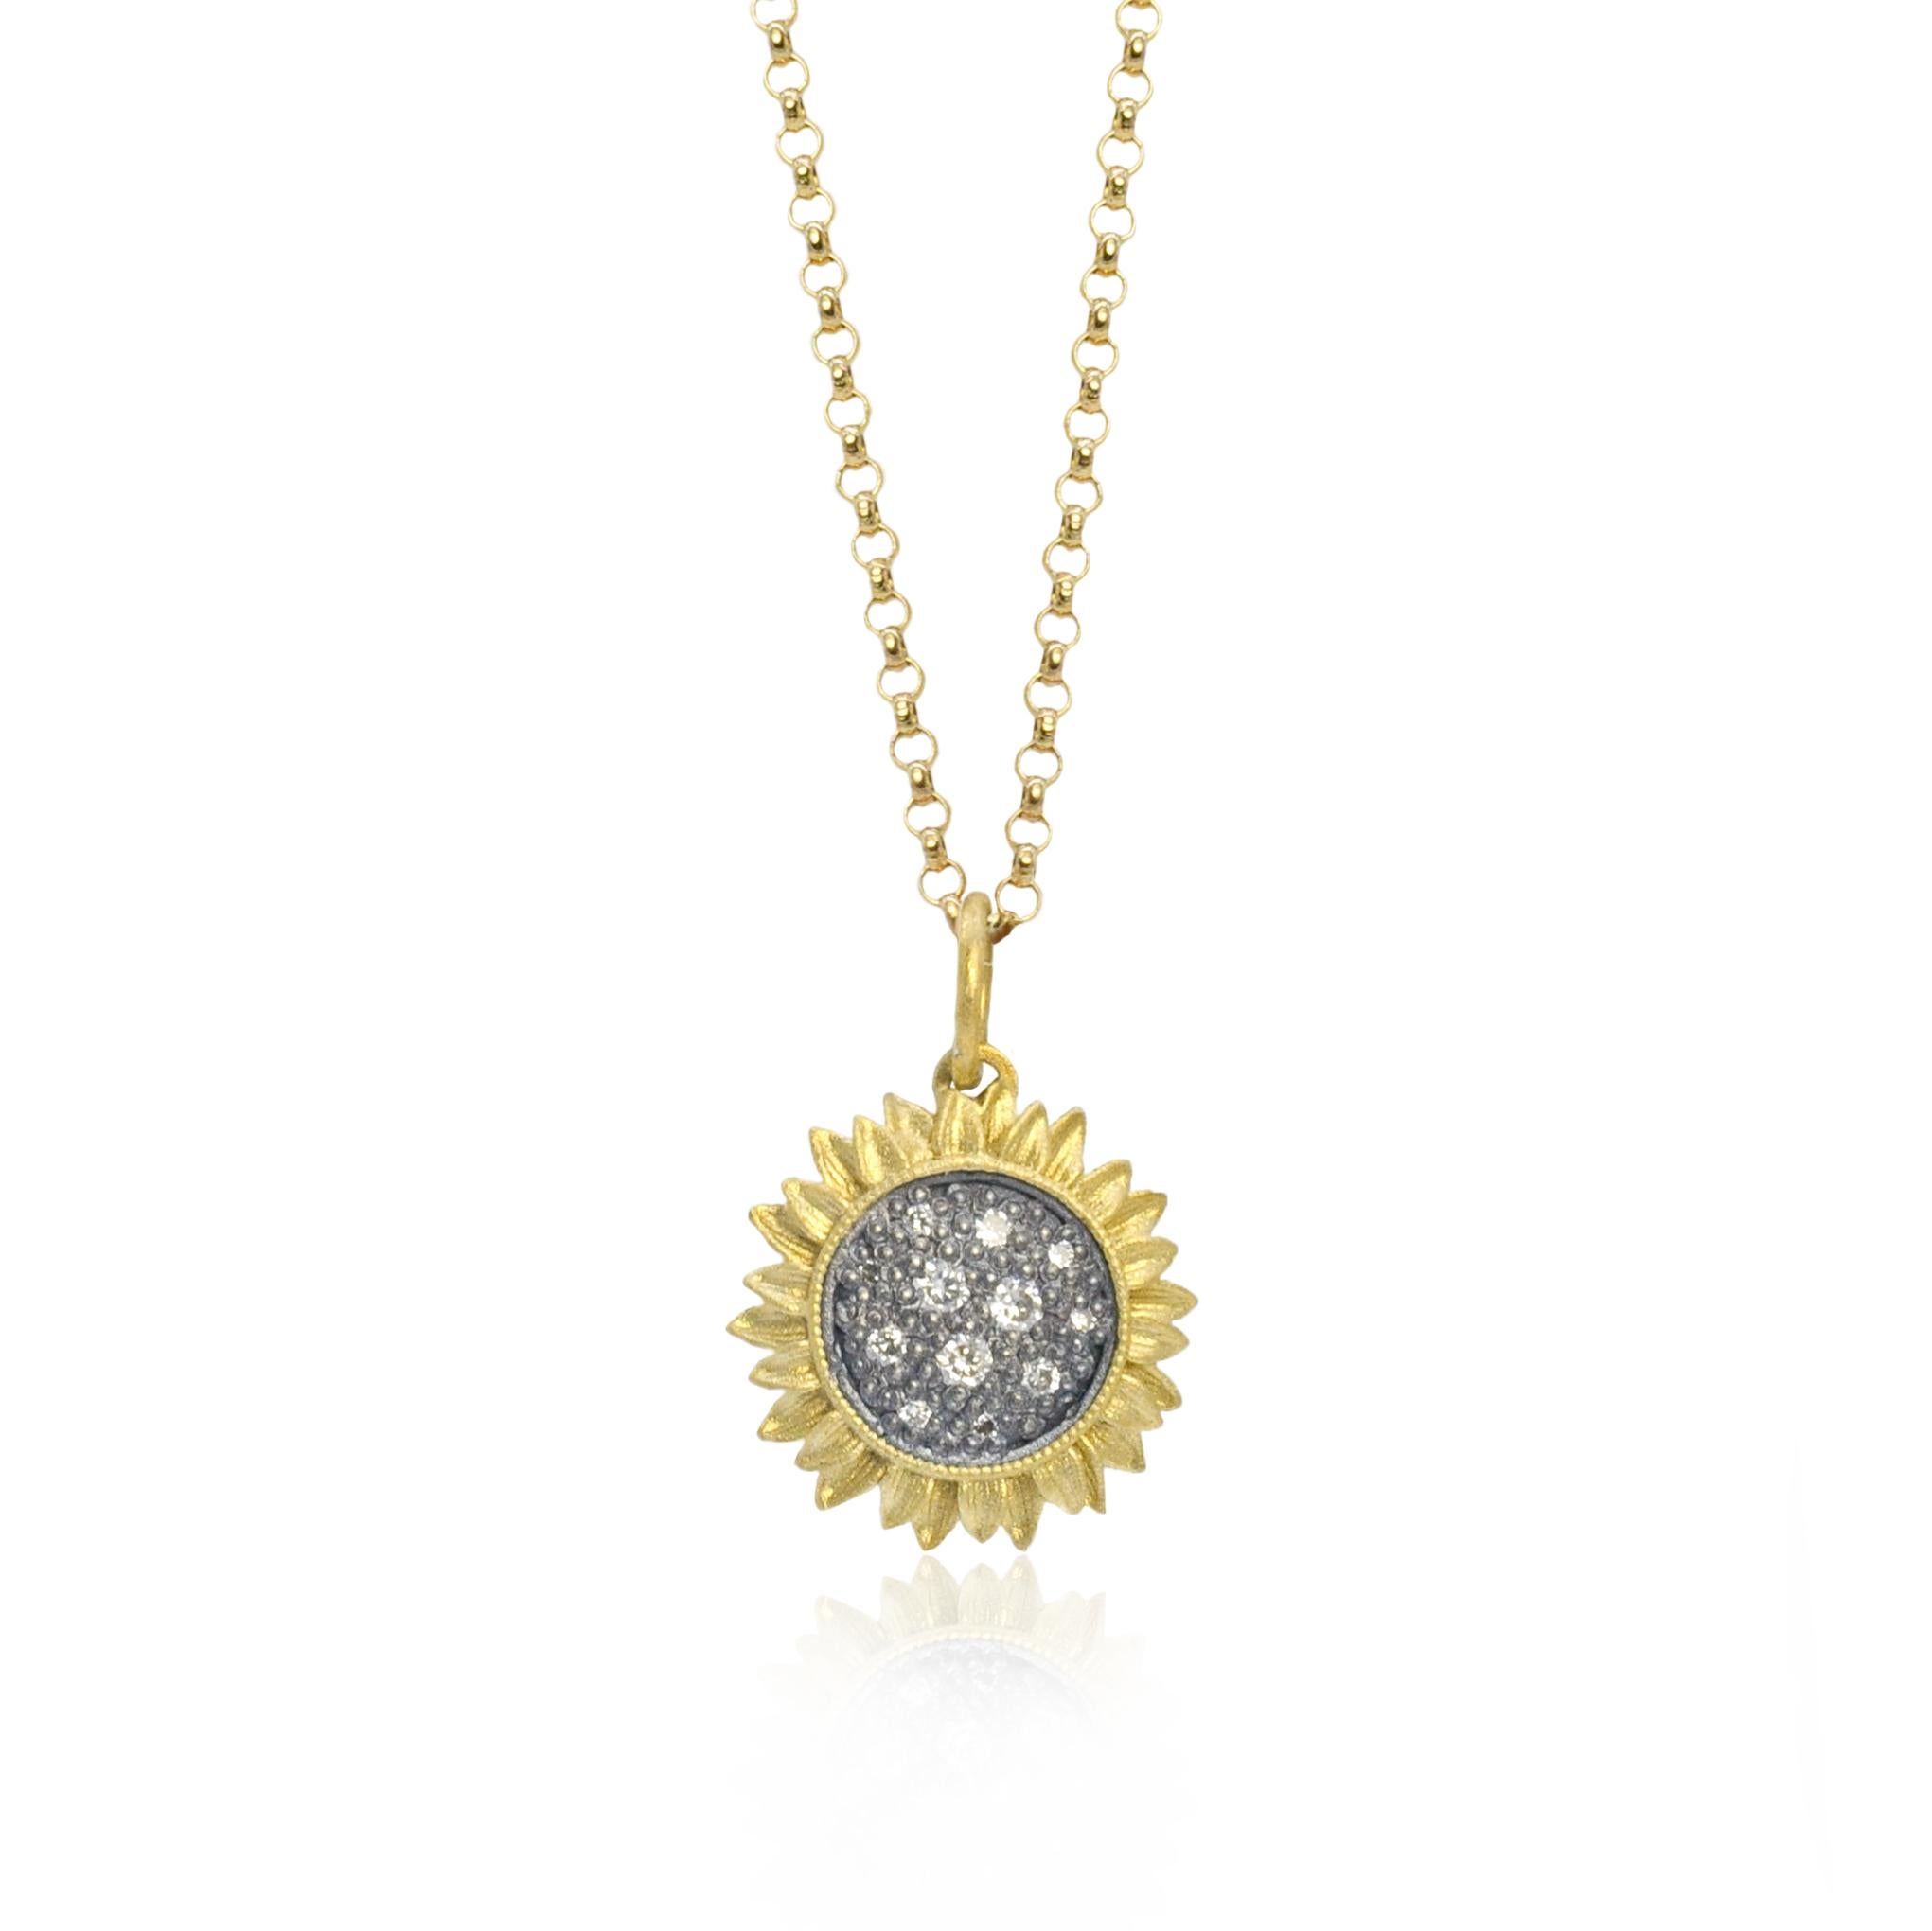 Artisan Sunflower Necklace with Pave Set Diamonds in Oxidized Silver, Tiny For Sale